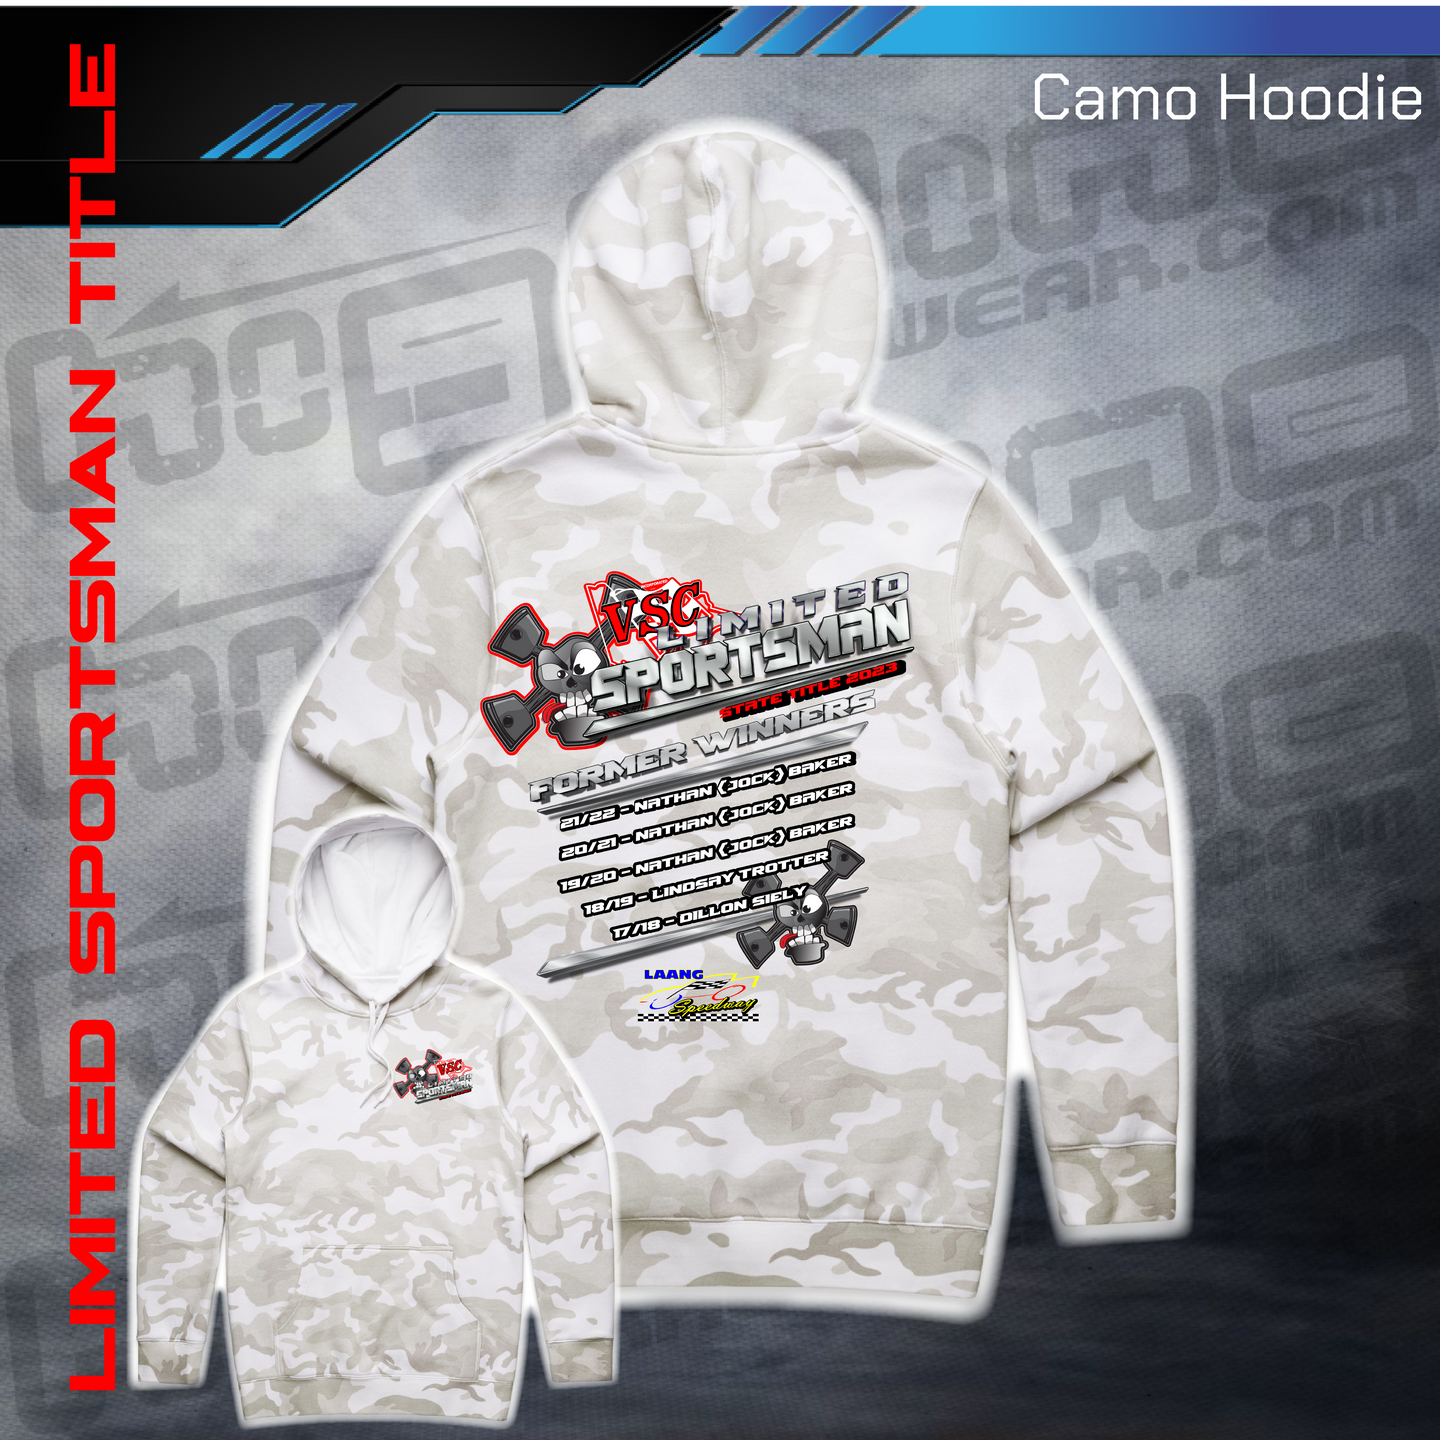 Camo Hoodie - VSC Limited Sportsman Title 2023